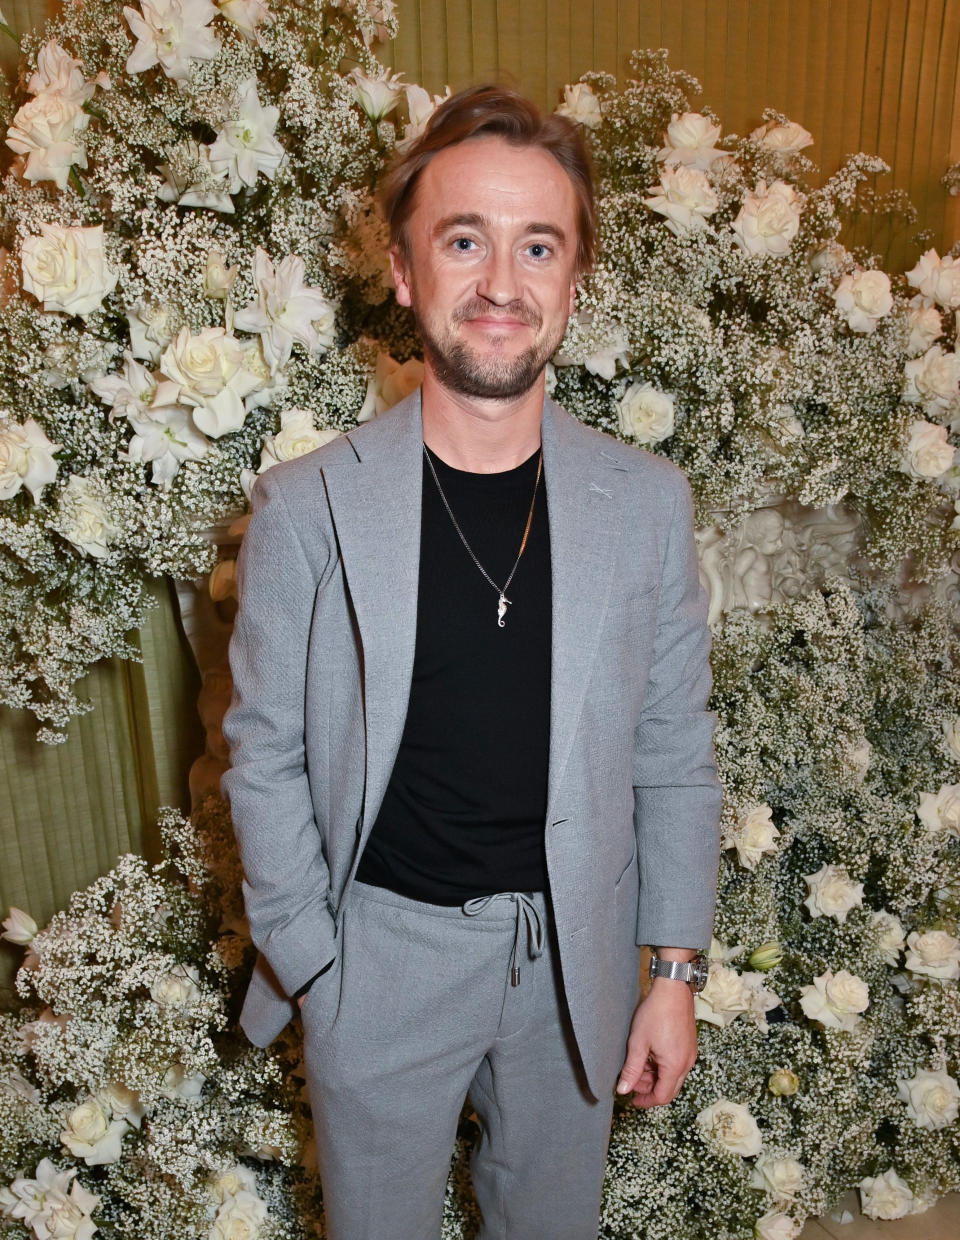 Tom Felton in a grey suit and black shirt, smiling, standing in front of a floral backdrop at an event